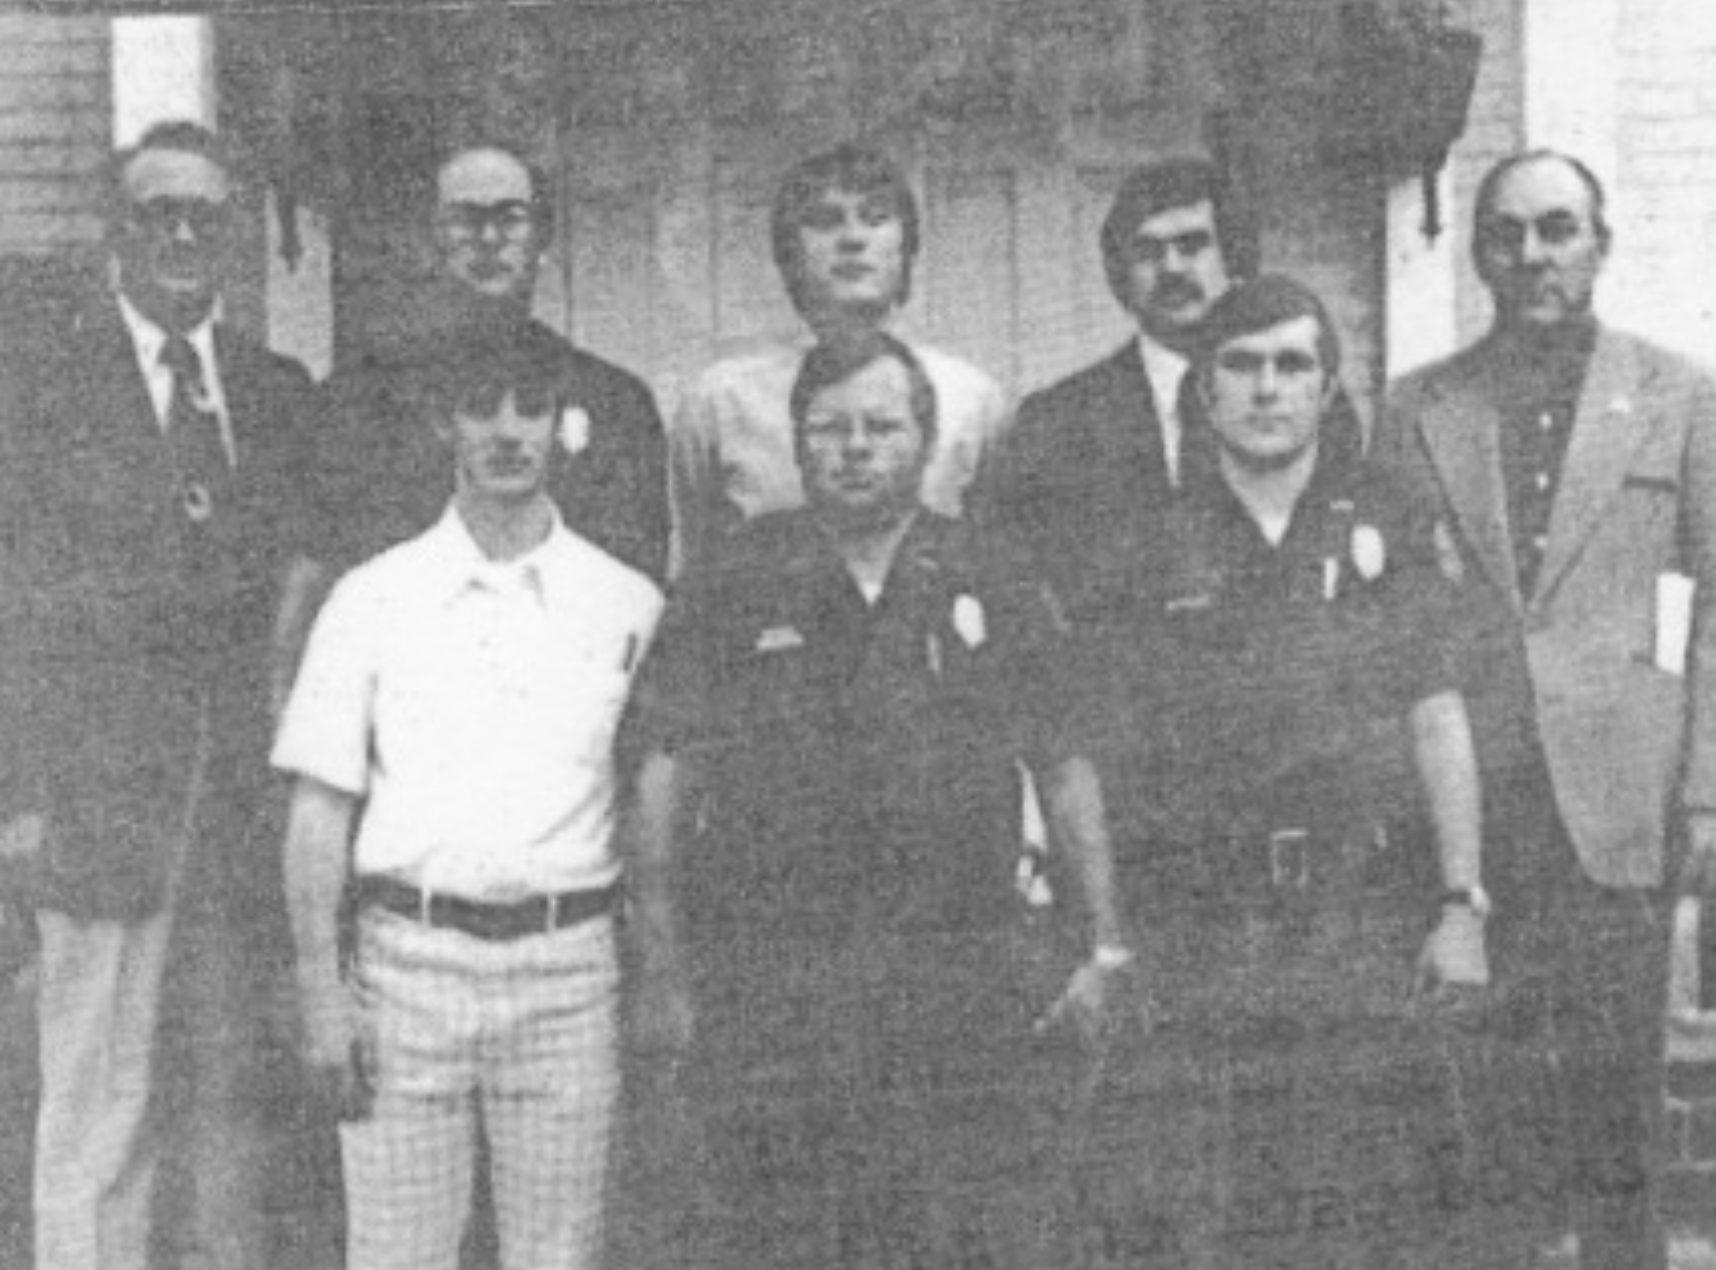 New Germantown police officers hired last month were introduced at a recent meeting of the Board of Mayor and Aldermen.   Back row, from left, Mayor W.A. “Dub” Nance, Jay Johnson, Brian Roper, Bruce Fergusson, Police Chief Joseph Gagliano  Front row, Robert Davis, Eddie Boatright and Robert Armbruster